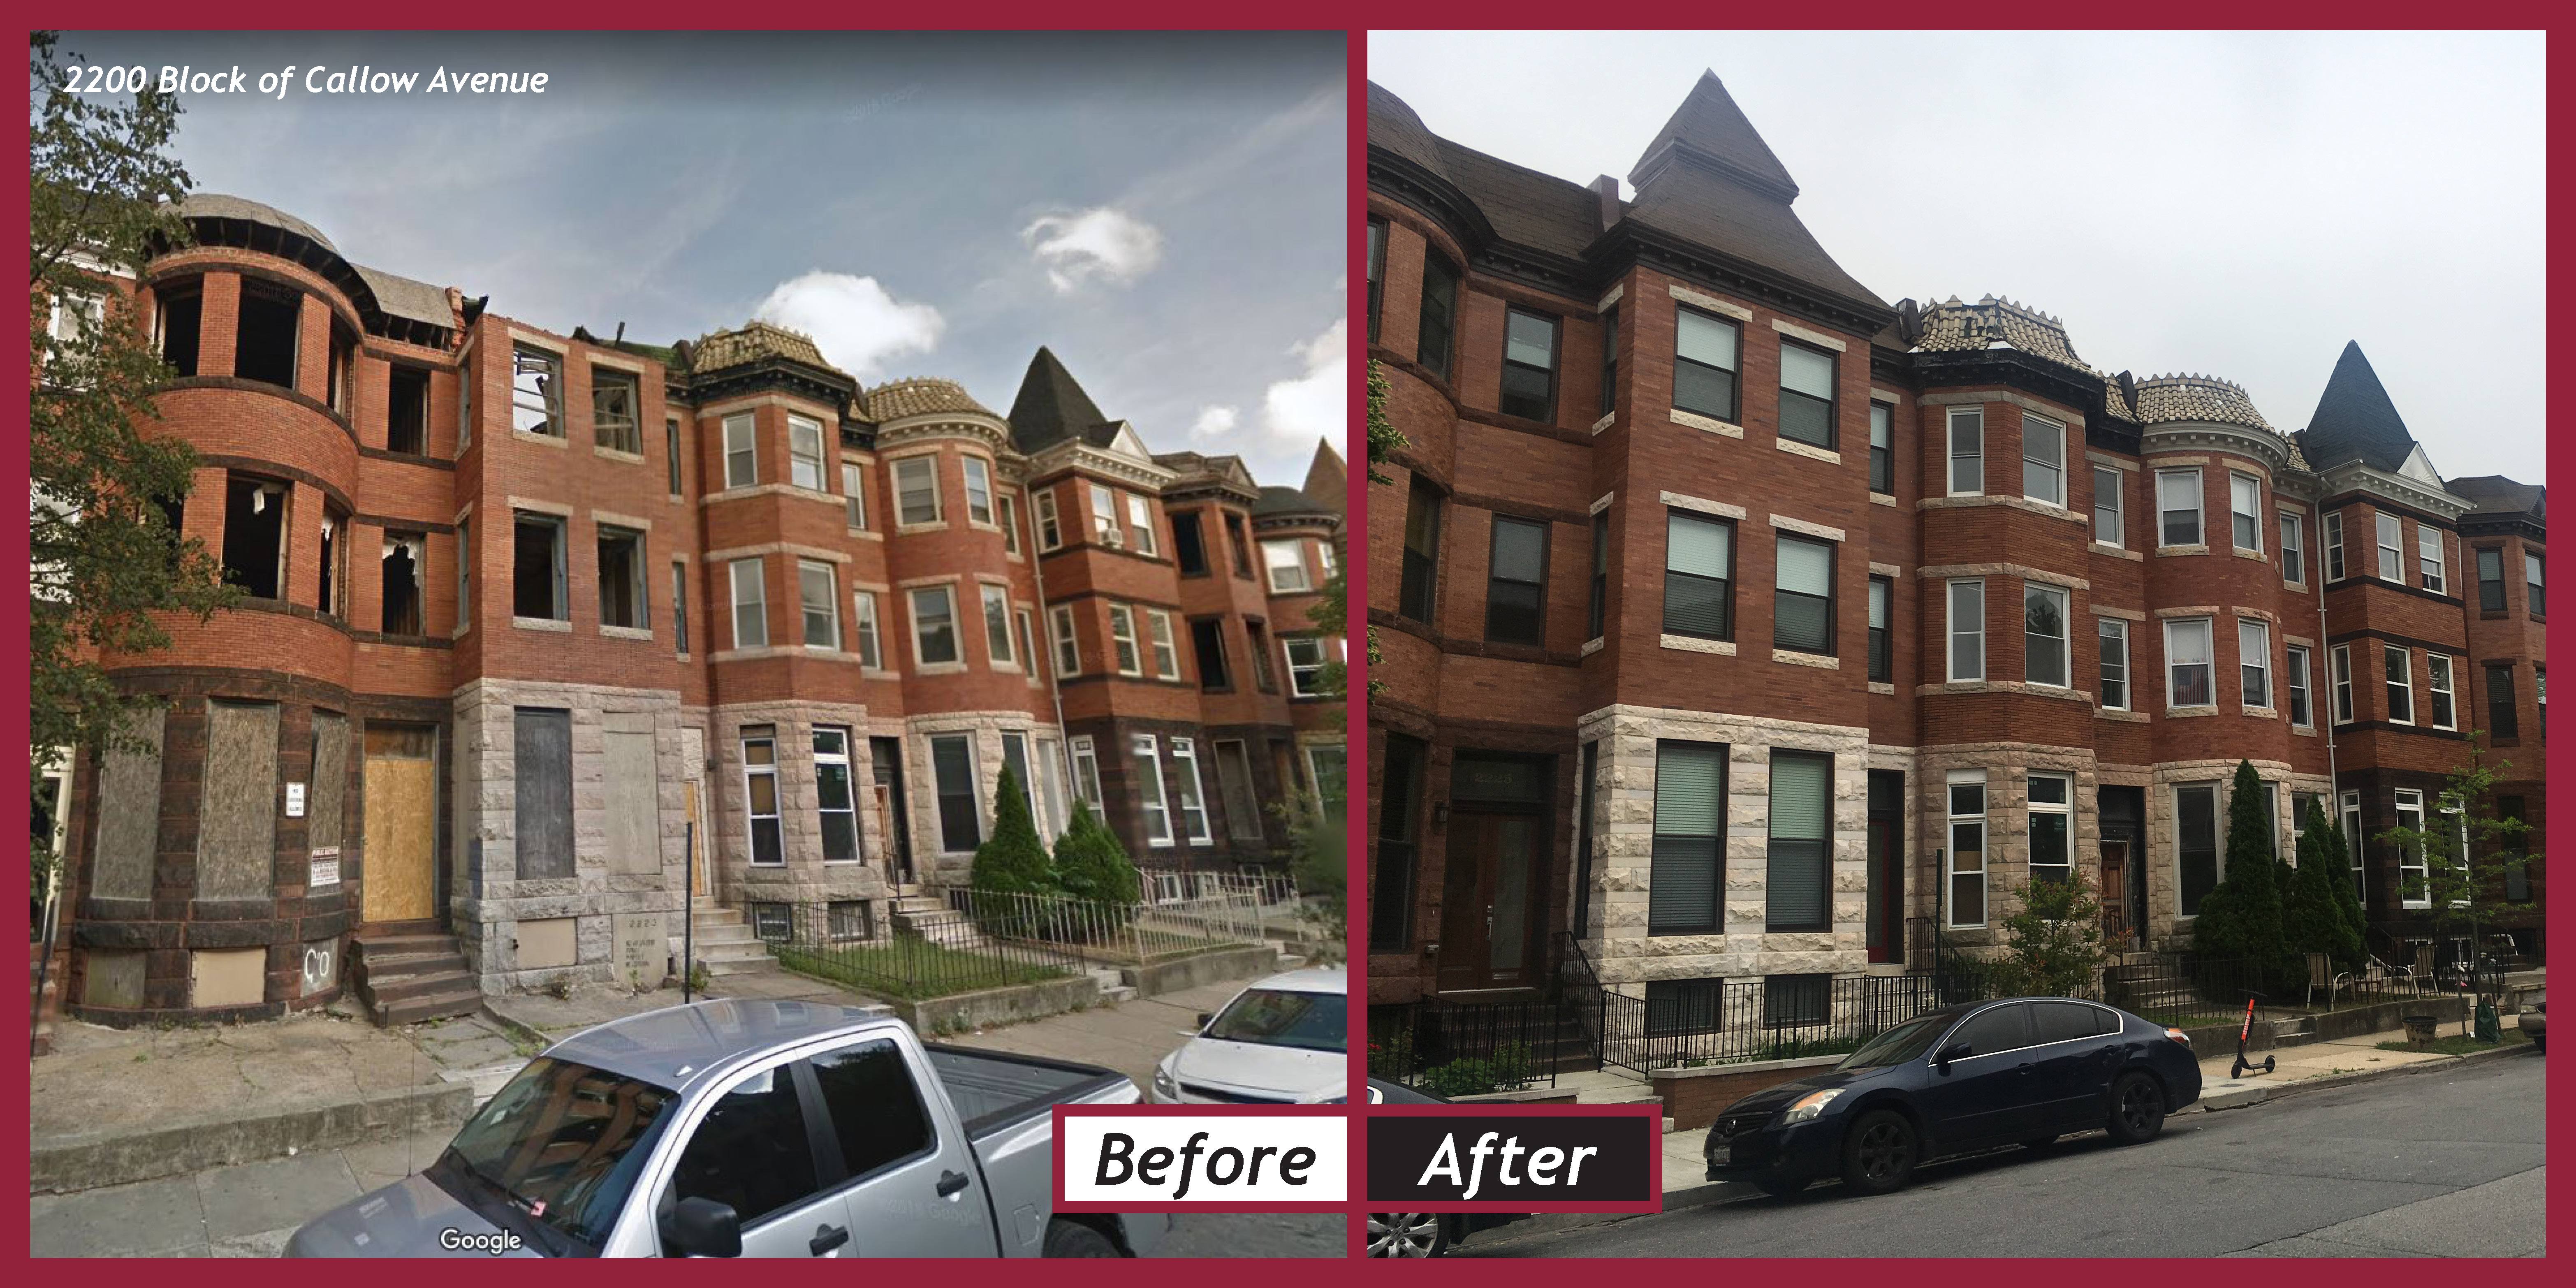 Before and after images of renovated rowhouses